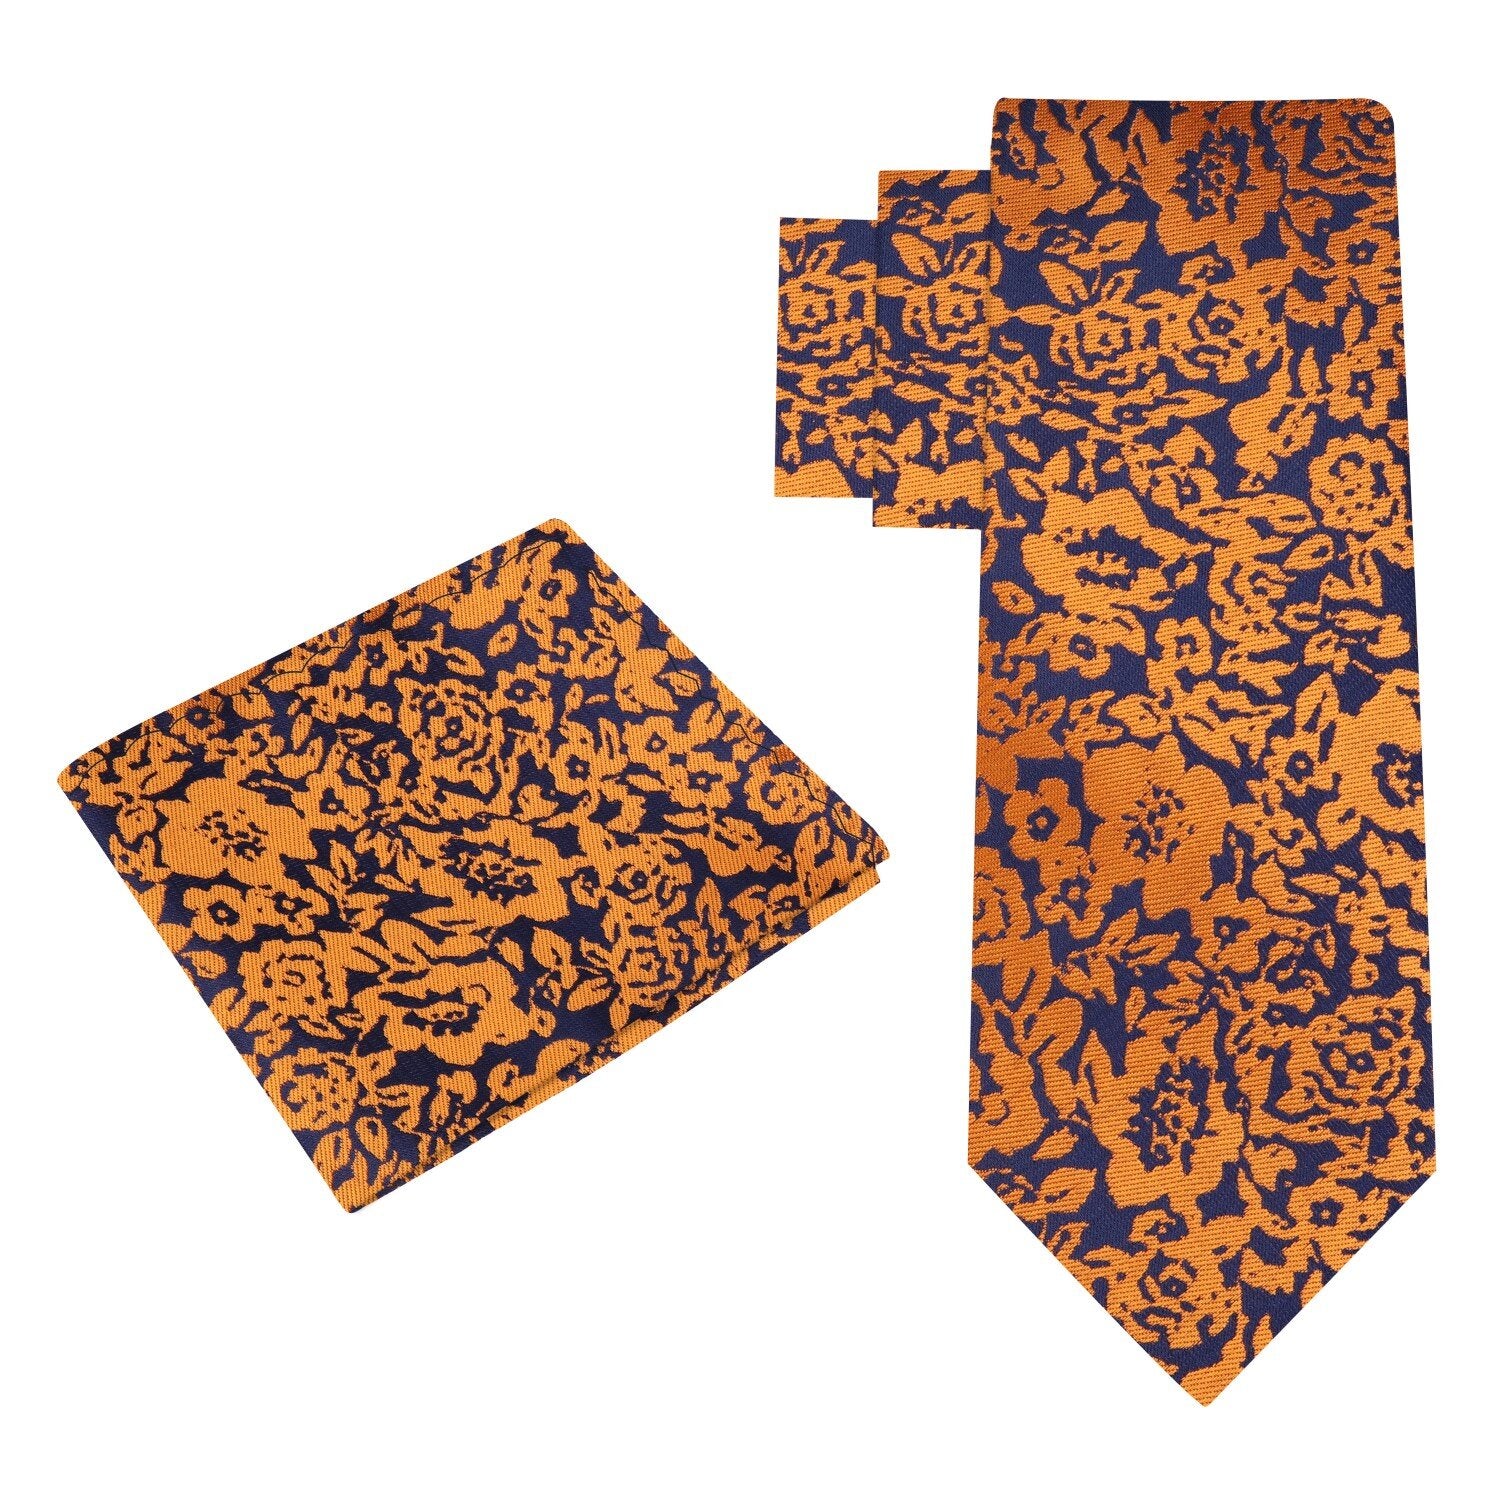 Alt view: A deep blue and rusty orange floral tie and pocket square